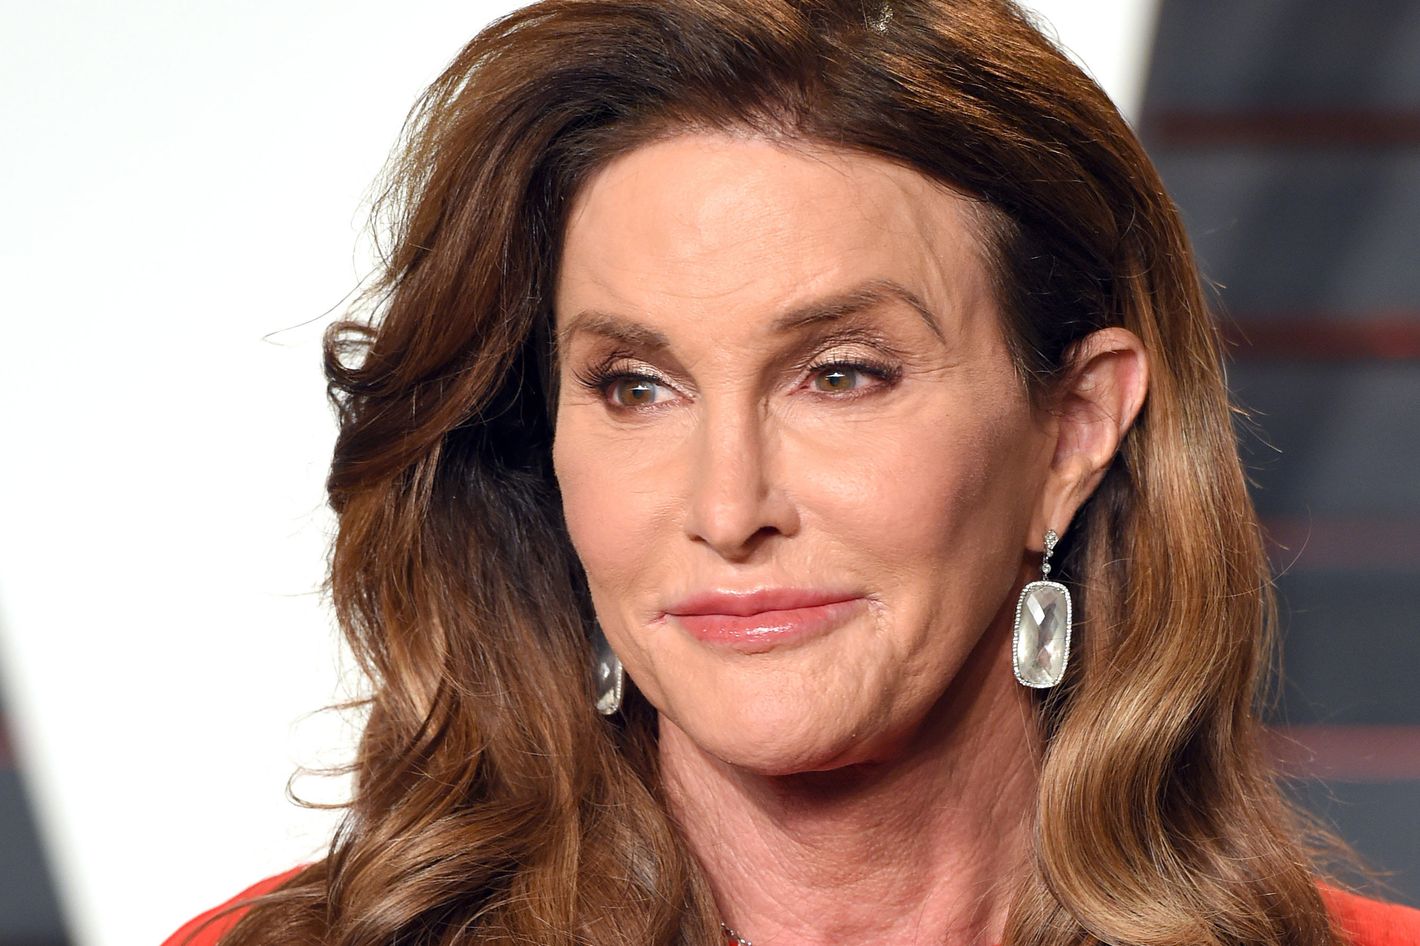 Bruce Jenner Sex Nude - Caitlyn Jenner Will Reportedly Pose Naked on the Cover of Sports Illustrated